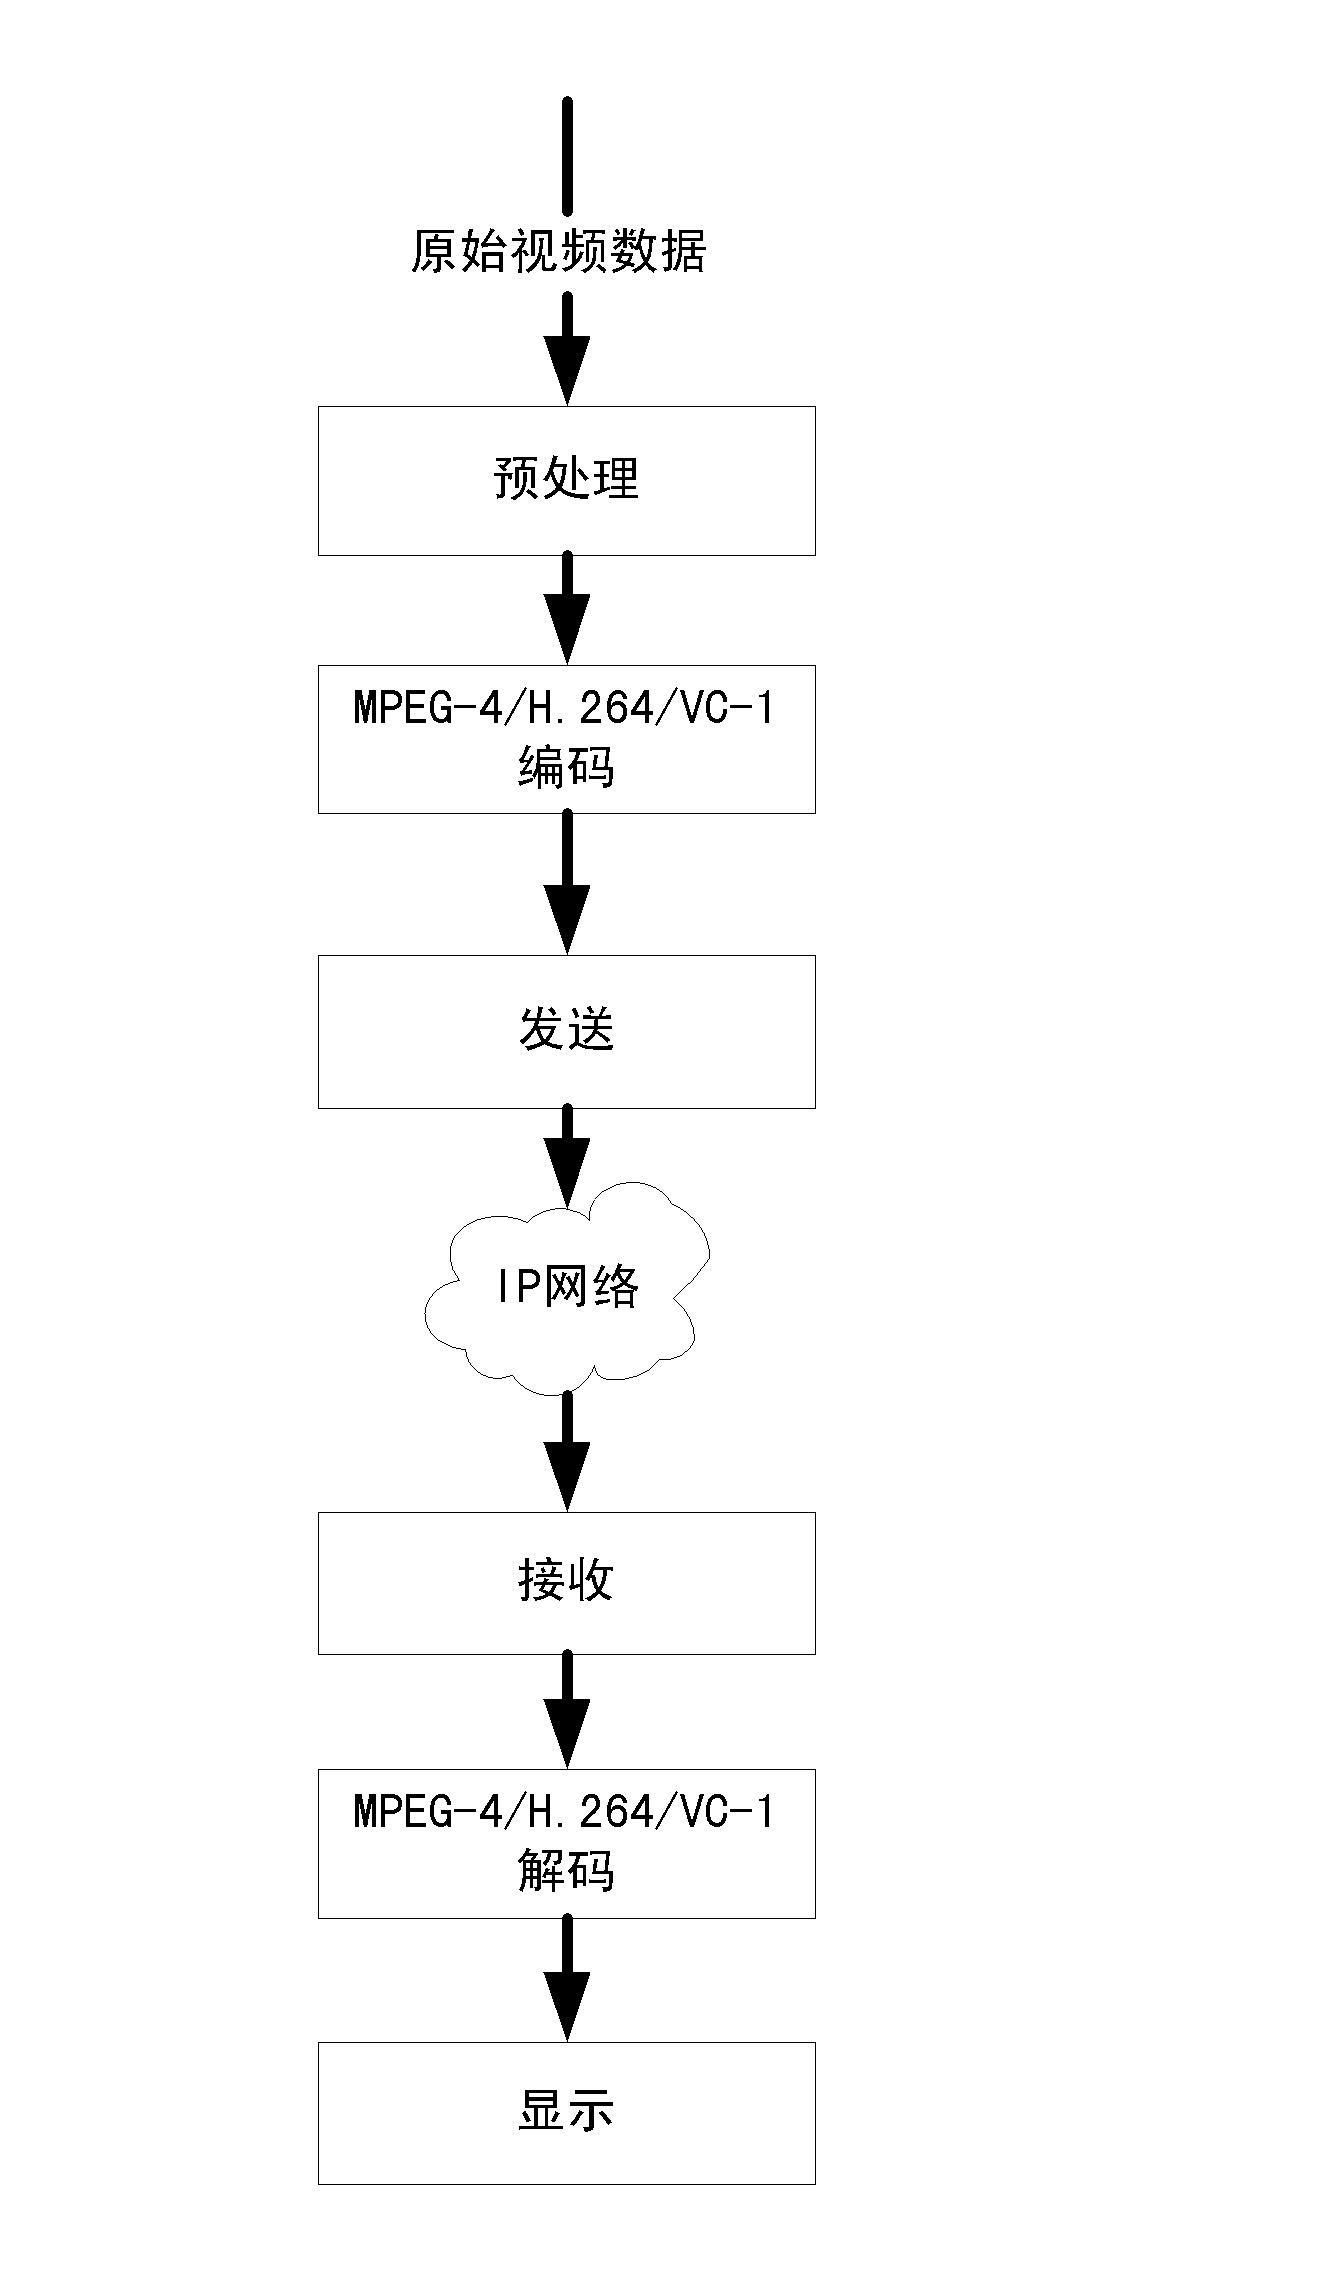 Multi-channel video transmitting system and method